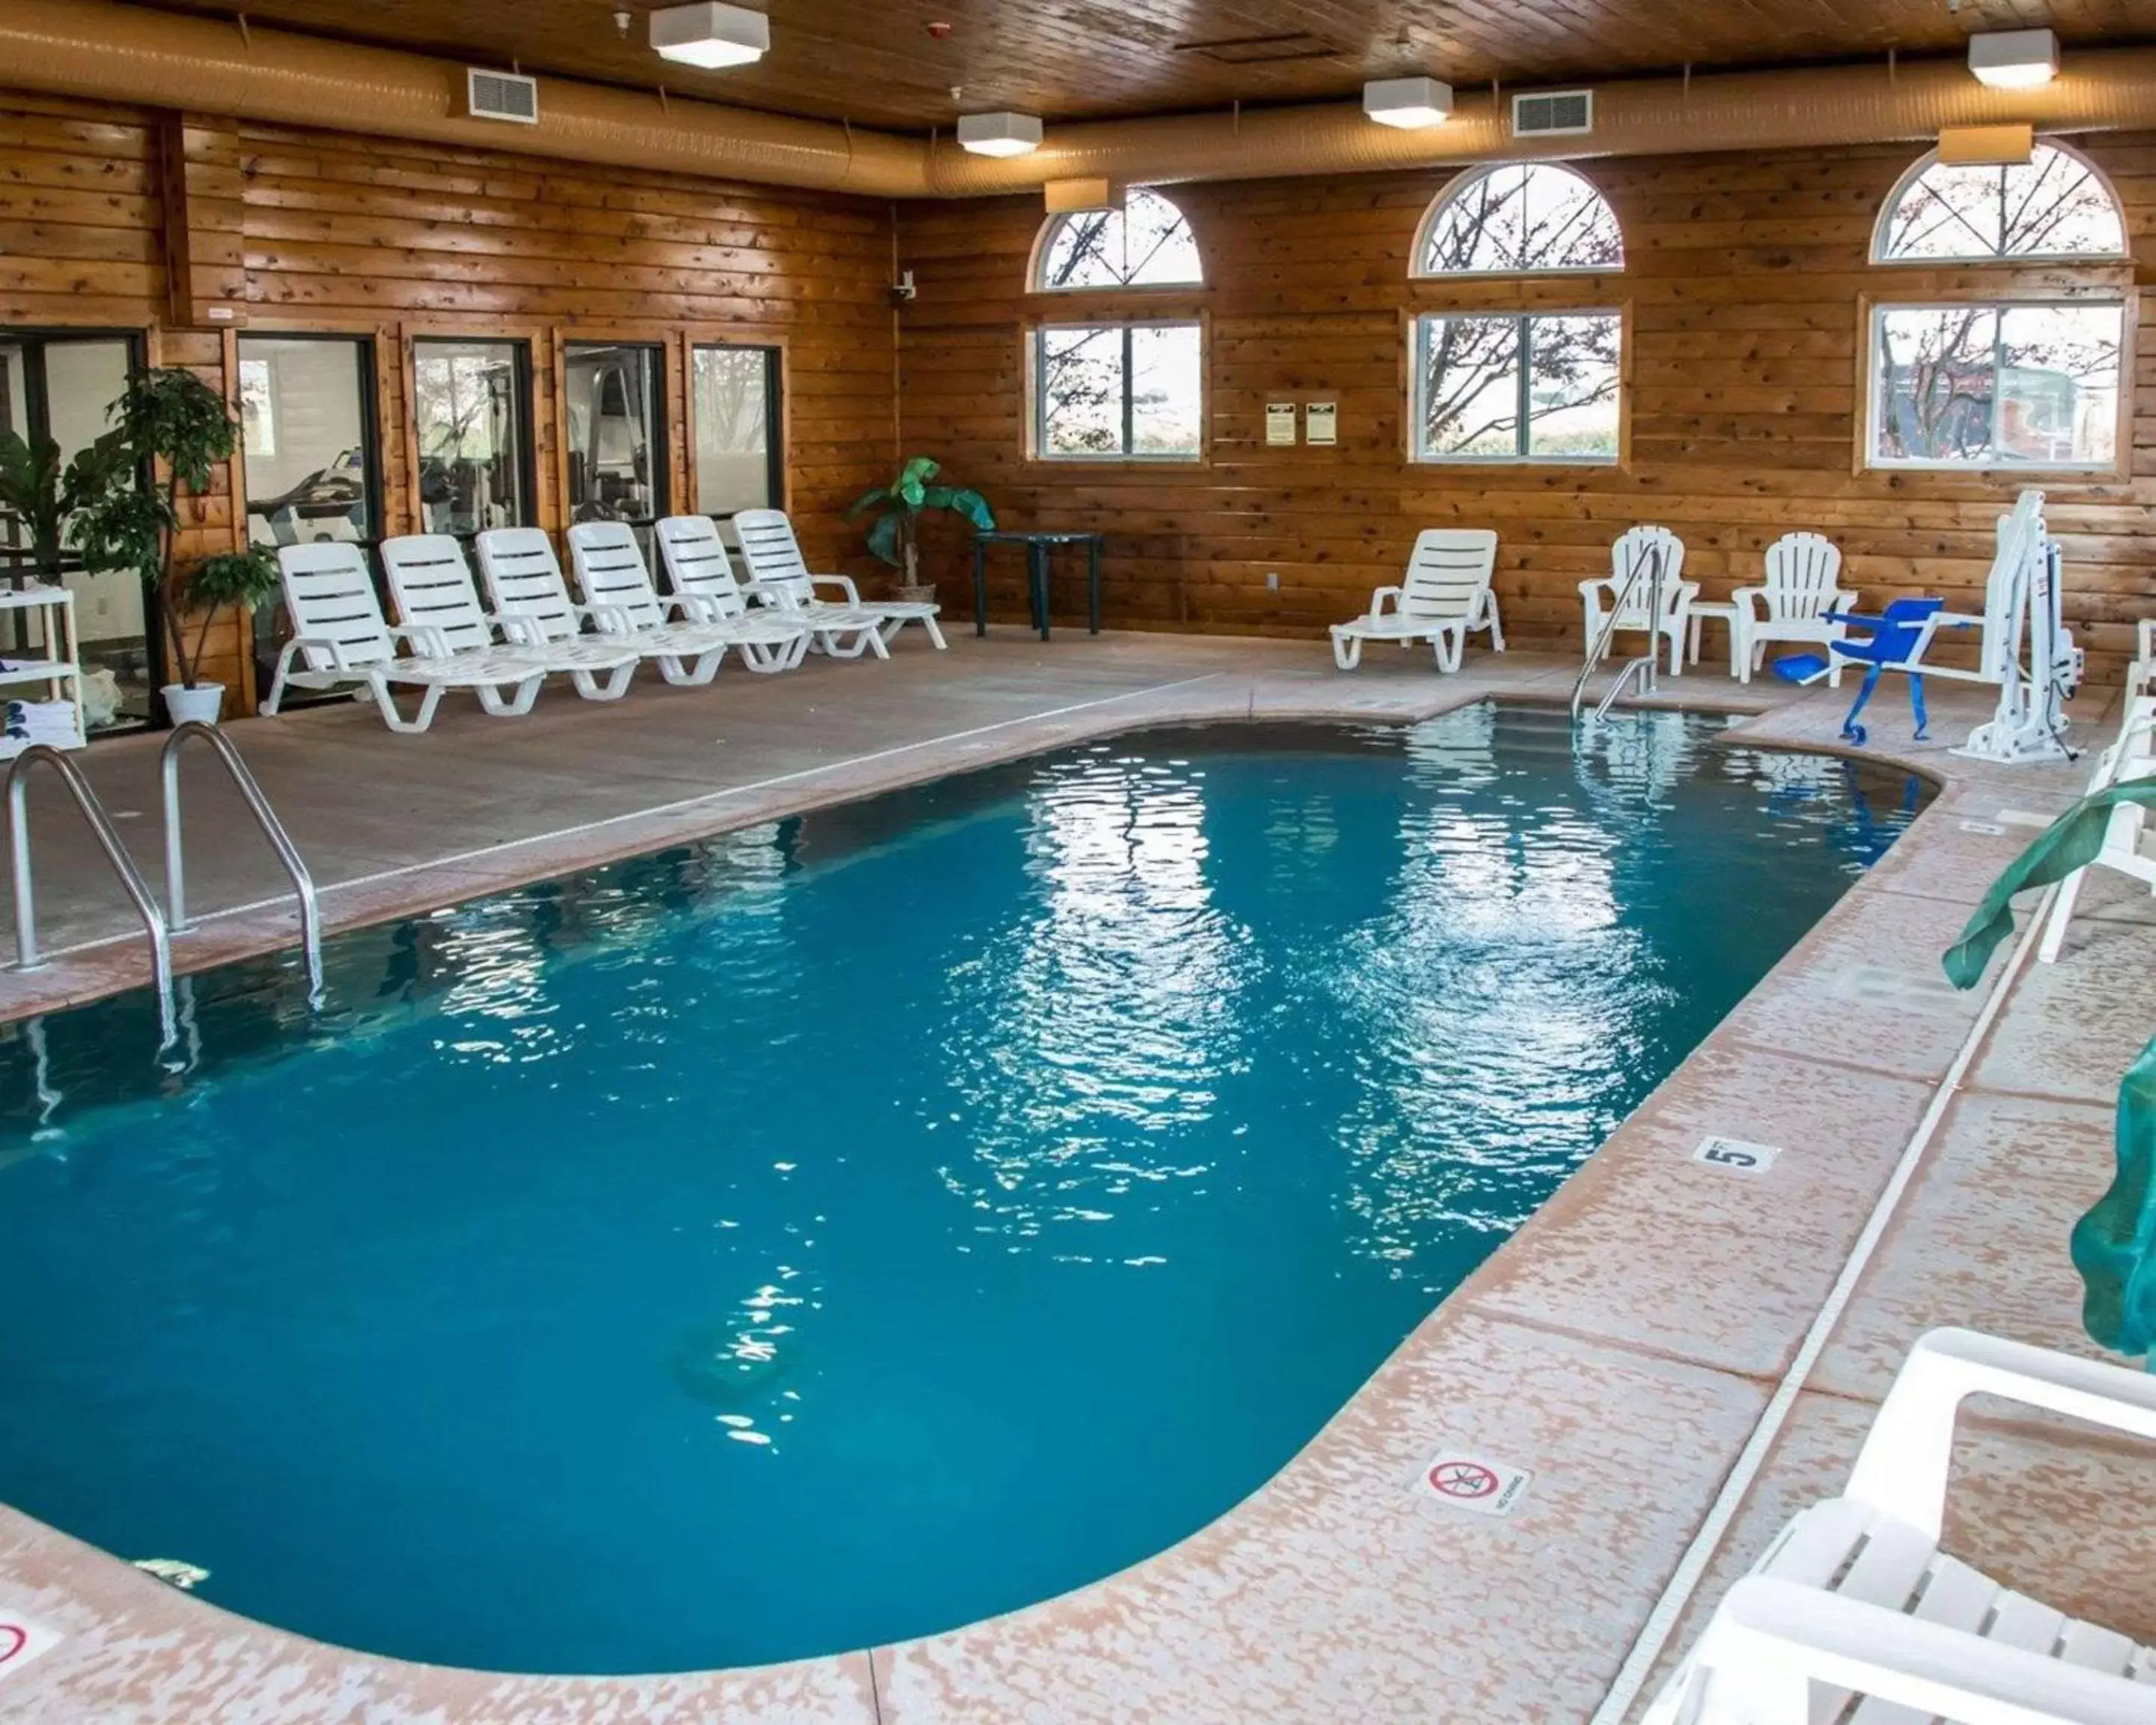 On site, Swimming Pool in Quality Inn & Suites Loves Park near Rockford